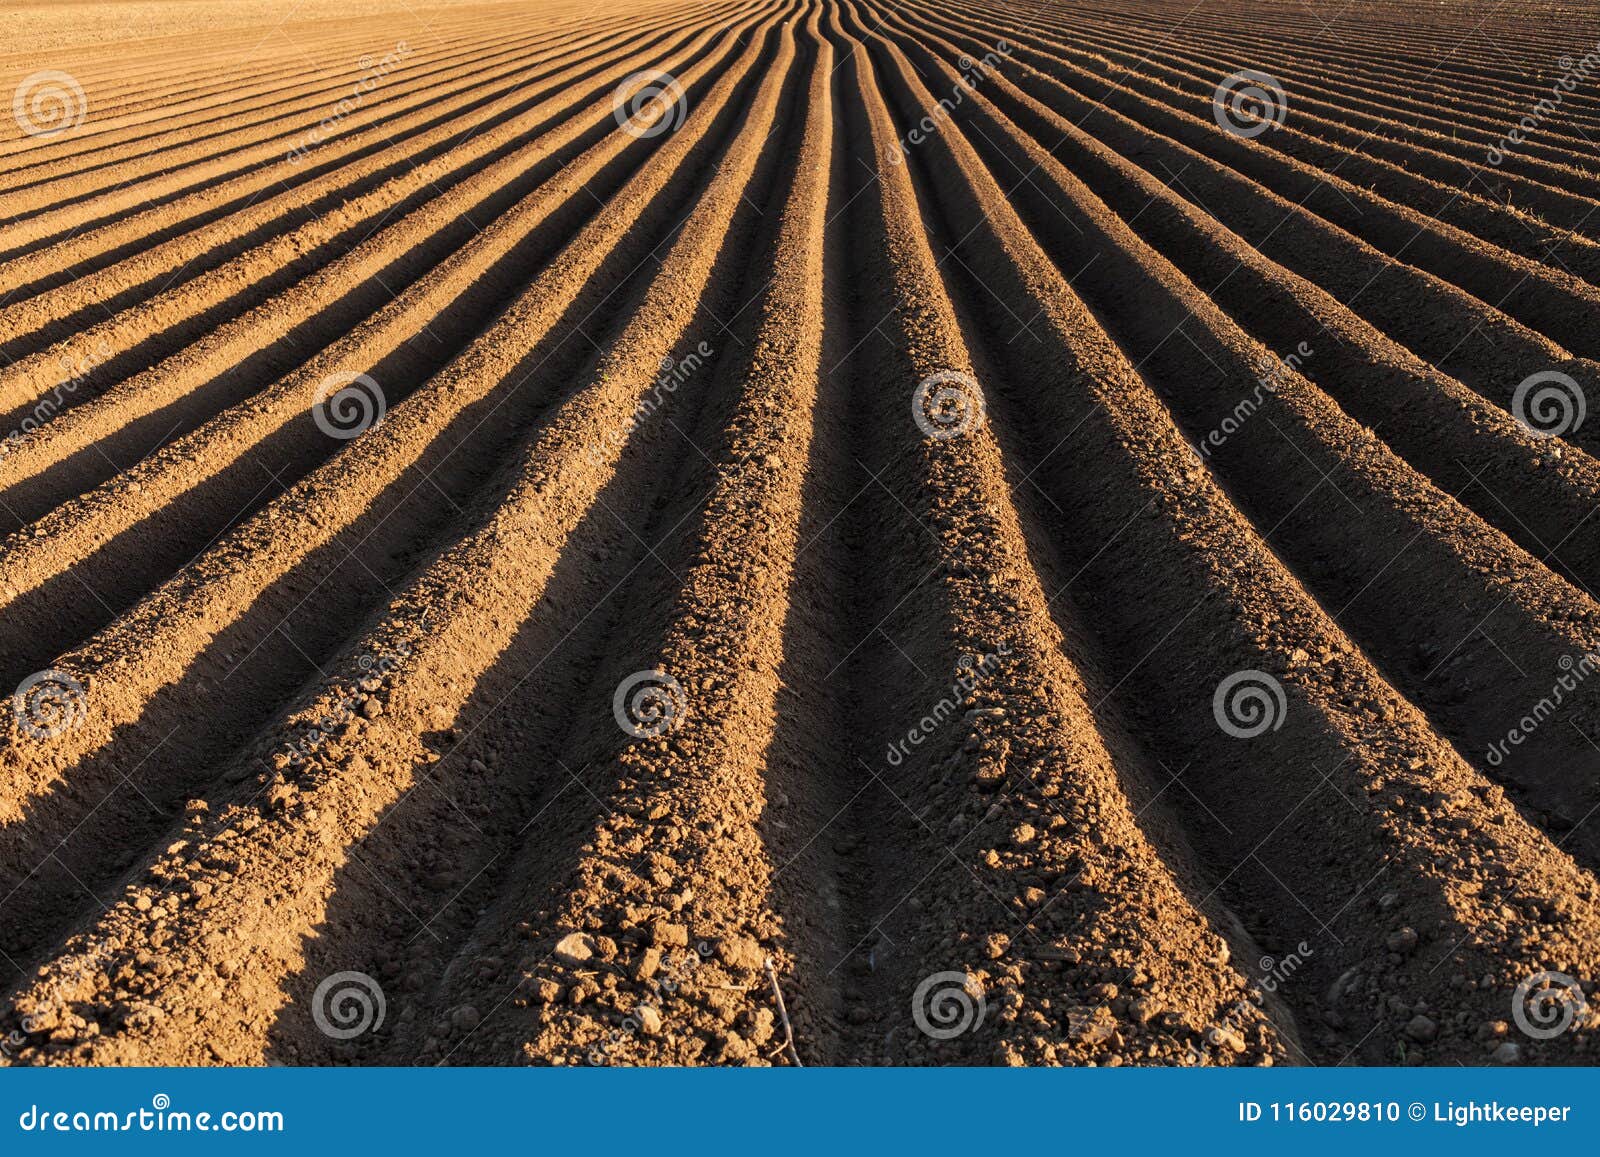 potato field in the early spring with the sowing rows running to